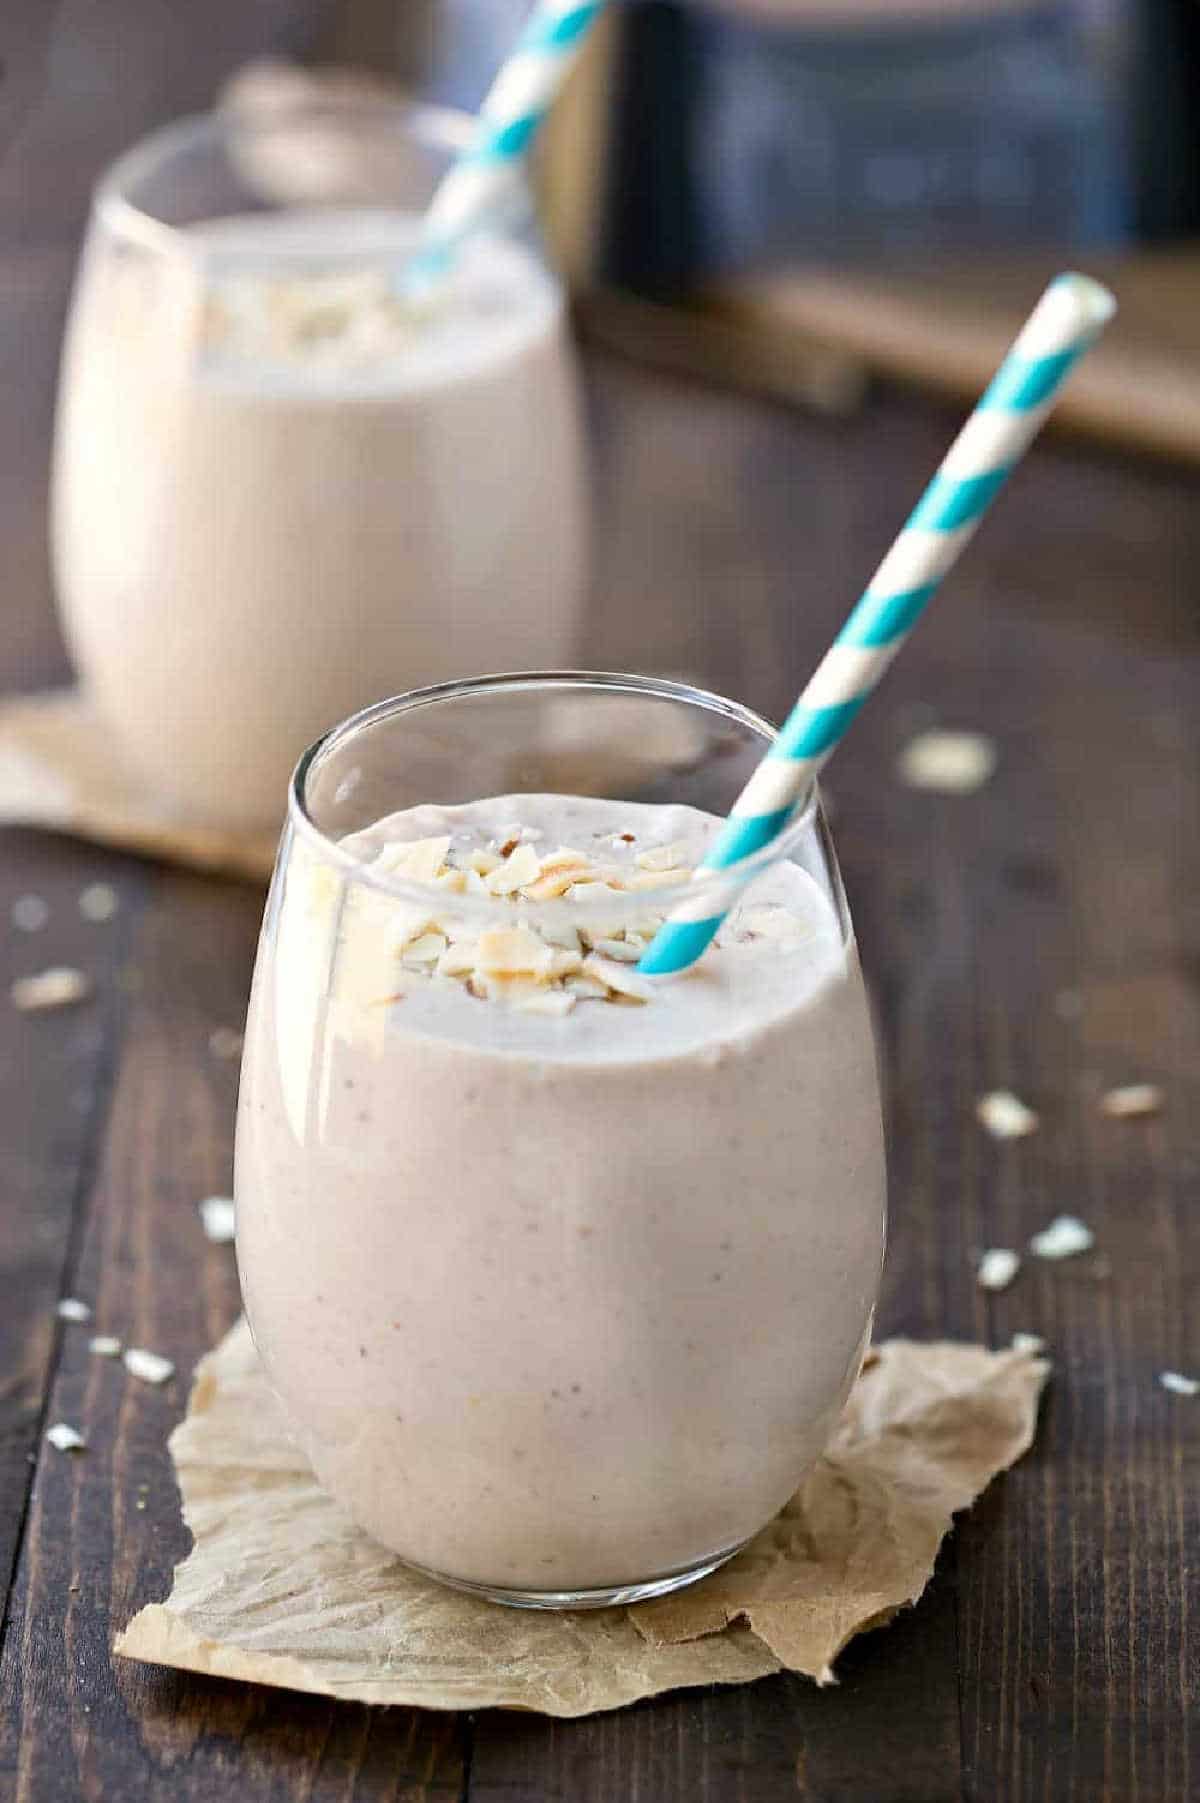 Two chocolate banana coconut almond smoothies with blue straws in them.